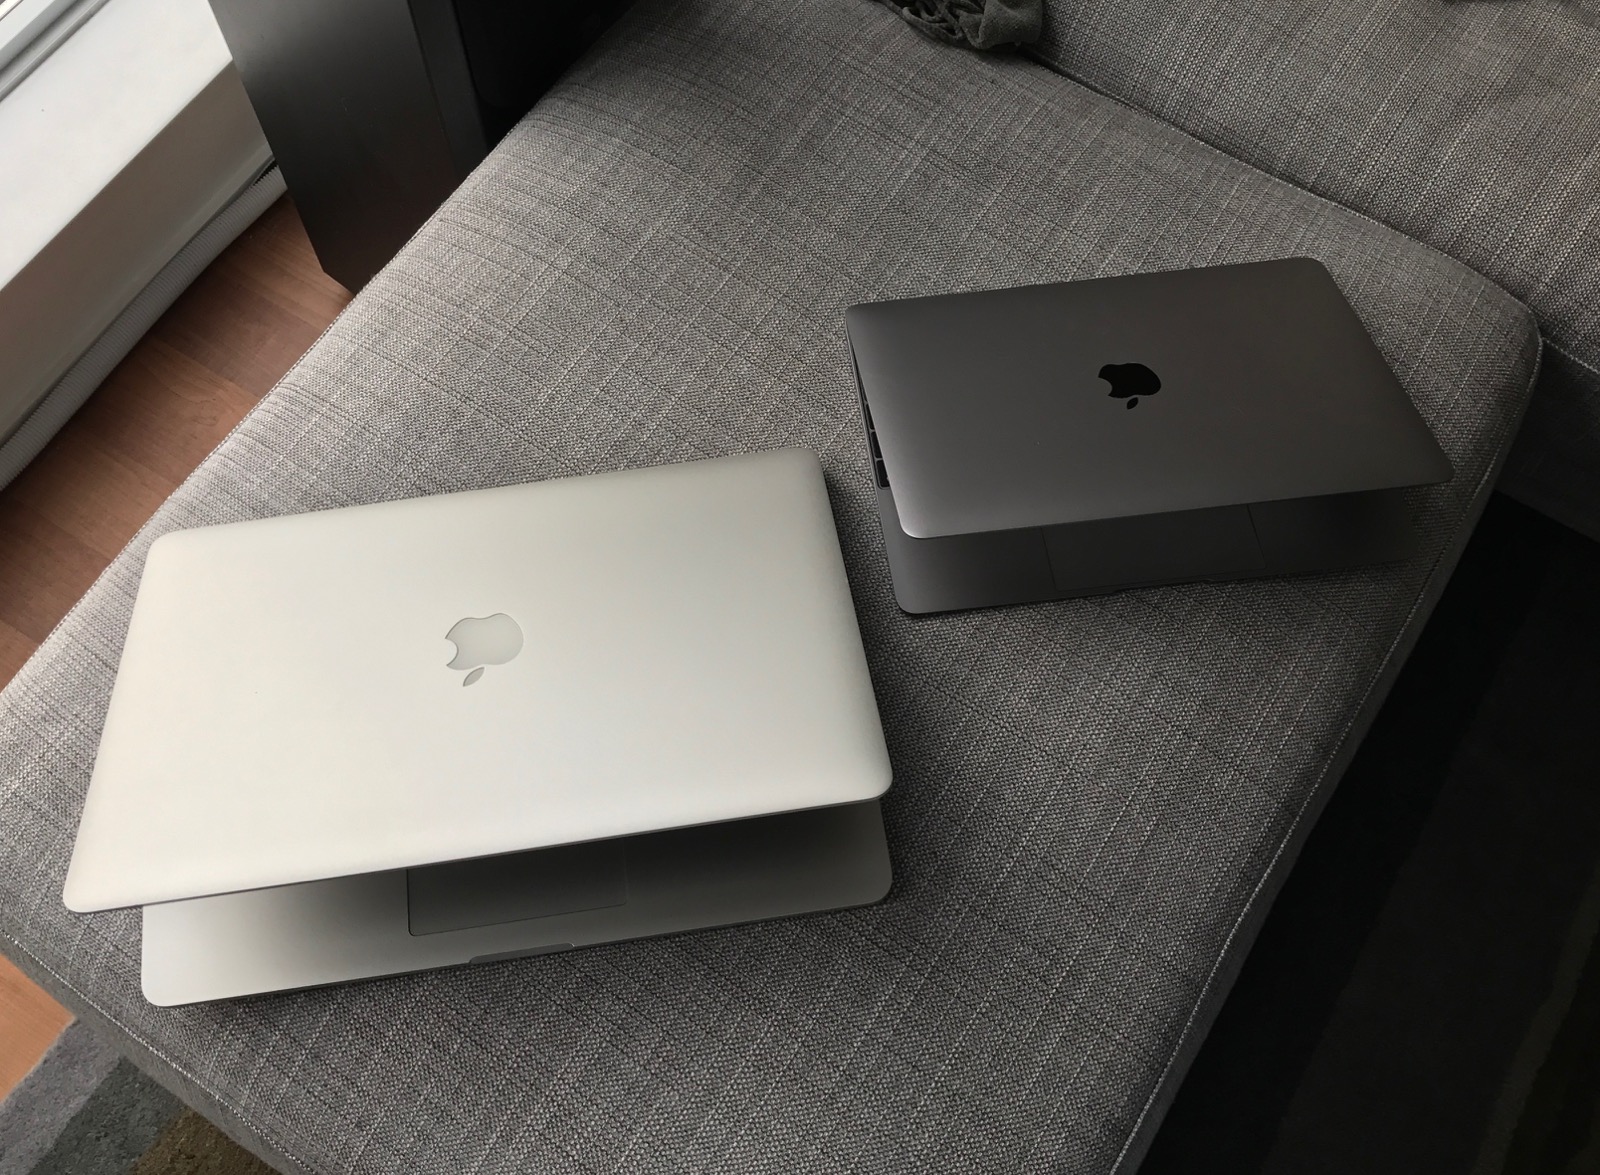 Space Gray rMBP or Silver ? | Page 5 | MacRumors Forums